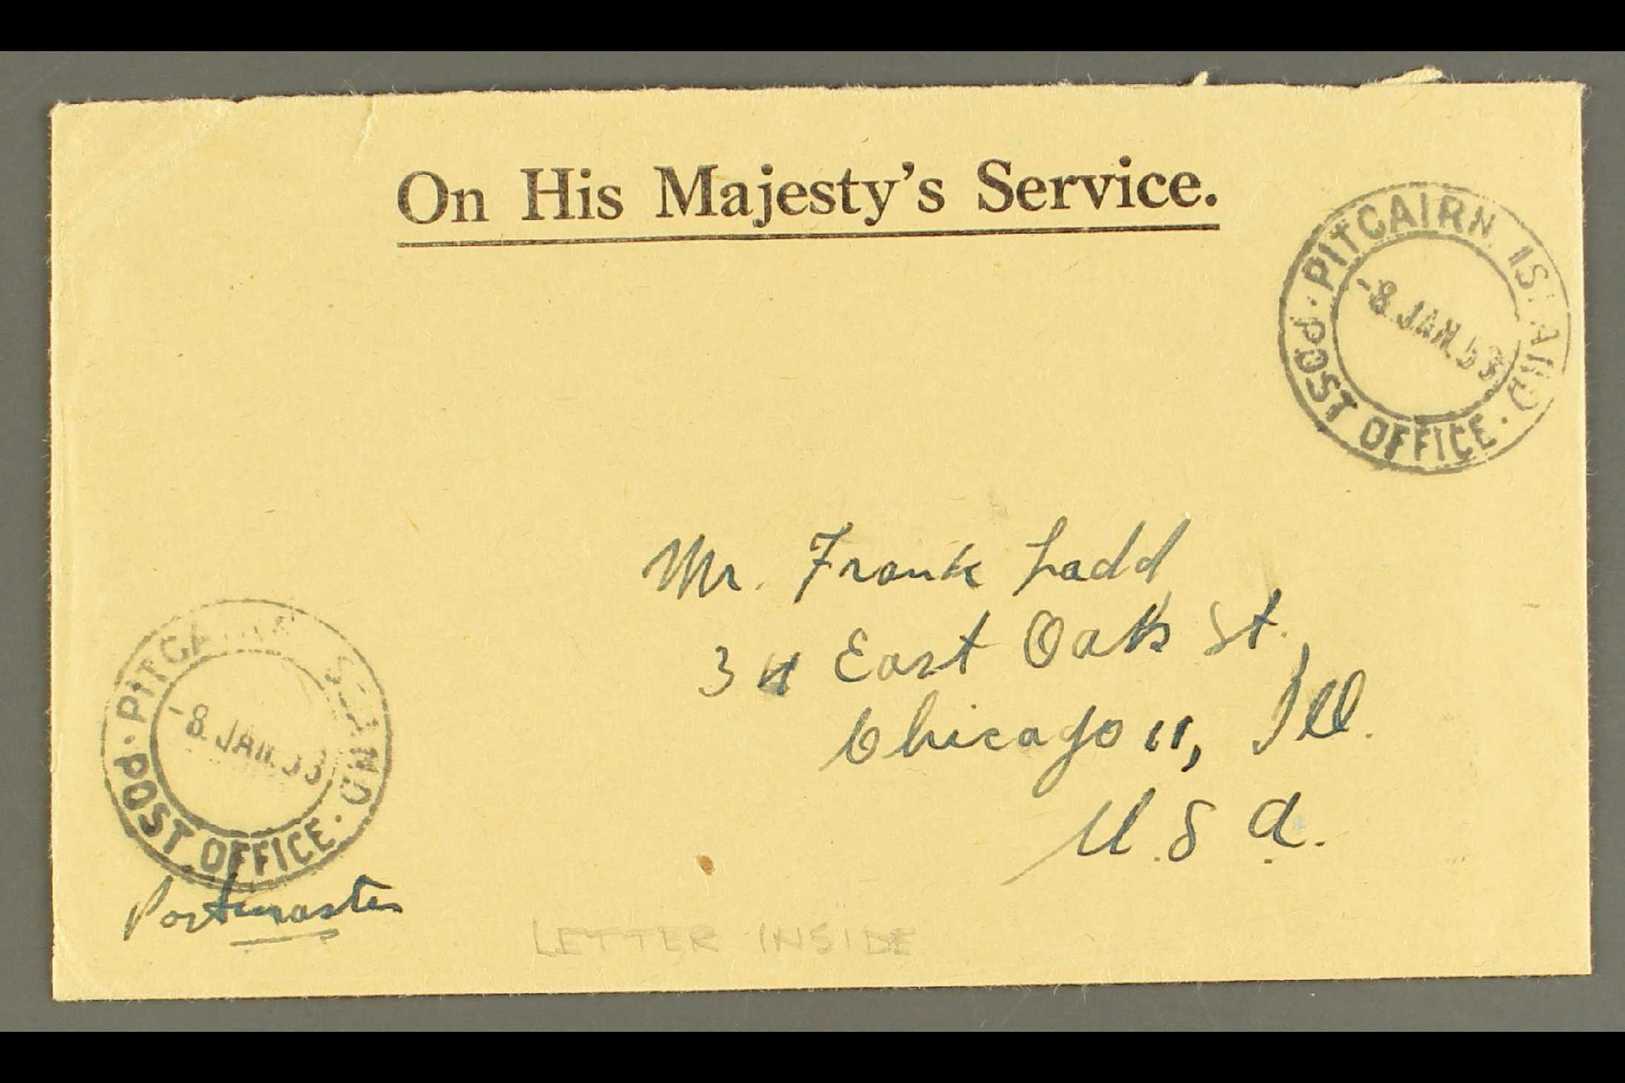 7378 1953 (8 Jan) Stampless Printed 'OHMS' Envelope To Chicago With Two Fine Strikes Of "Pitcairn Island Post Office" Cd - Pitcairn Islands